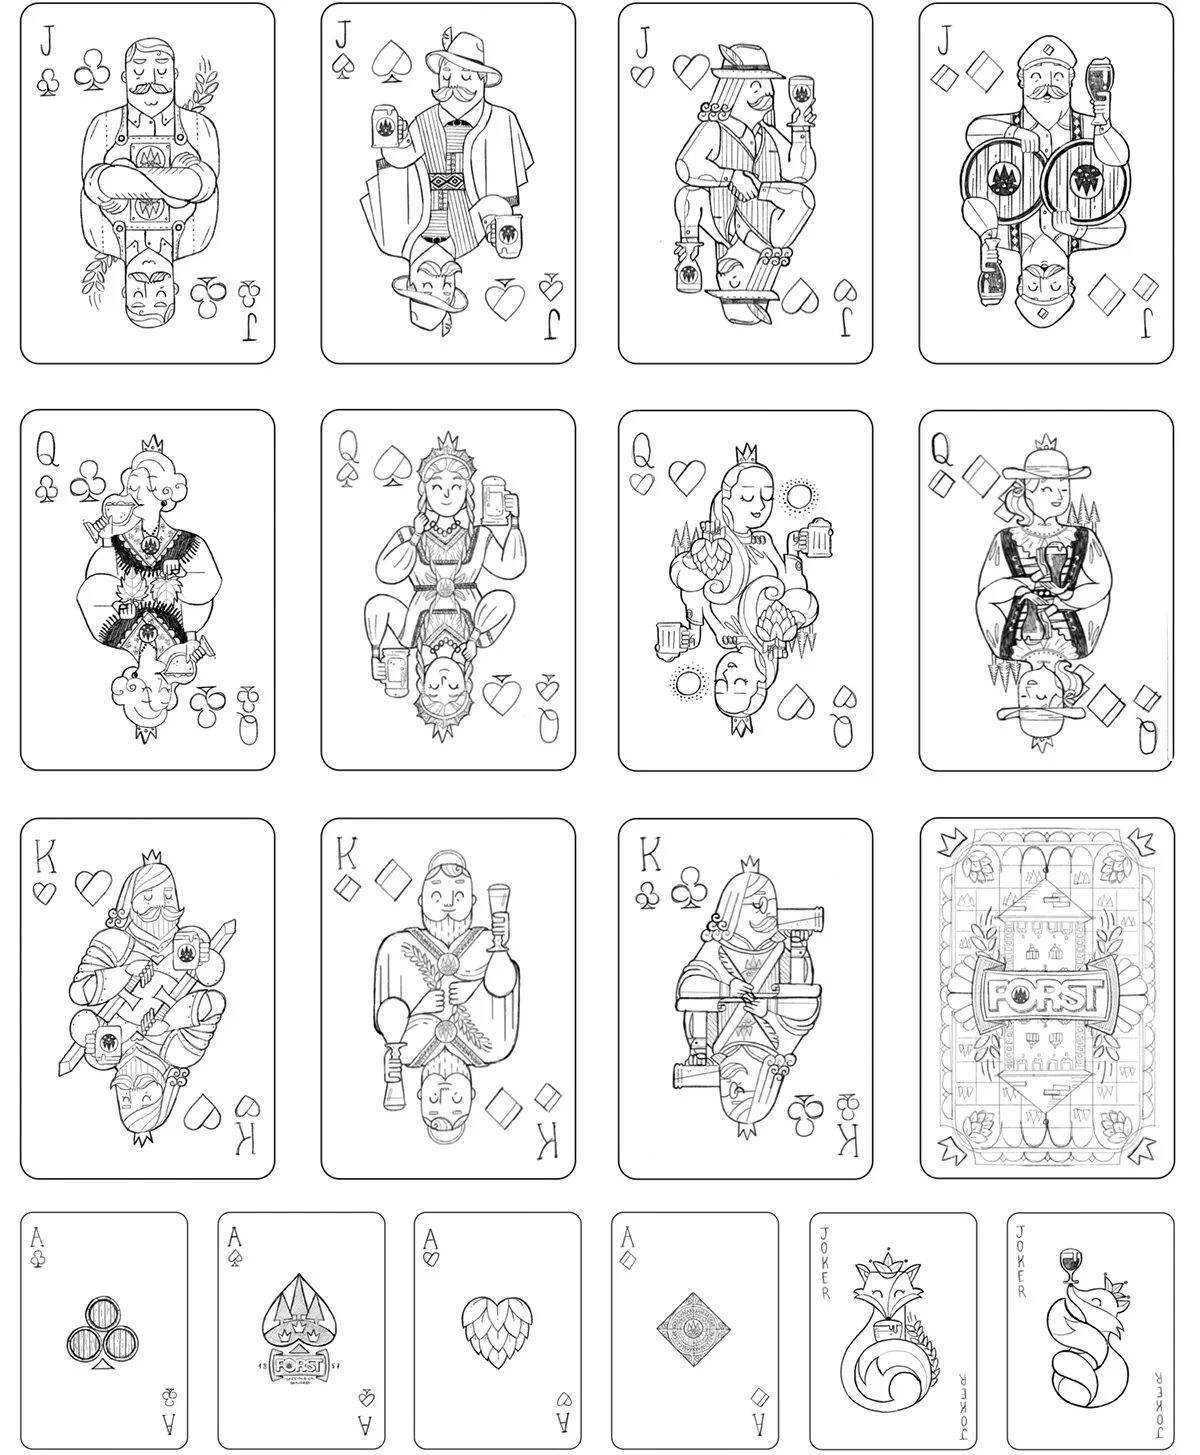 Playing cards #15